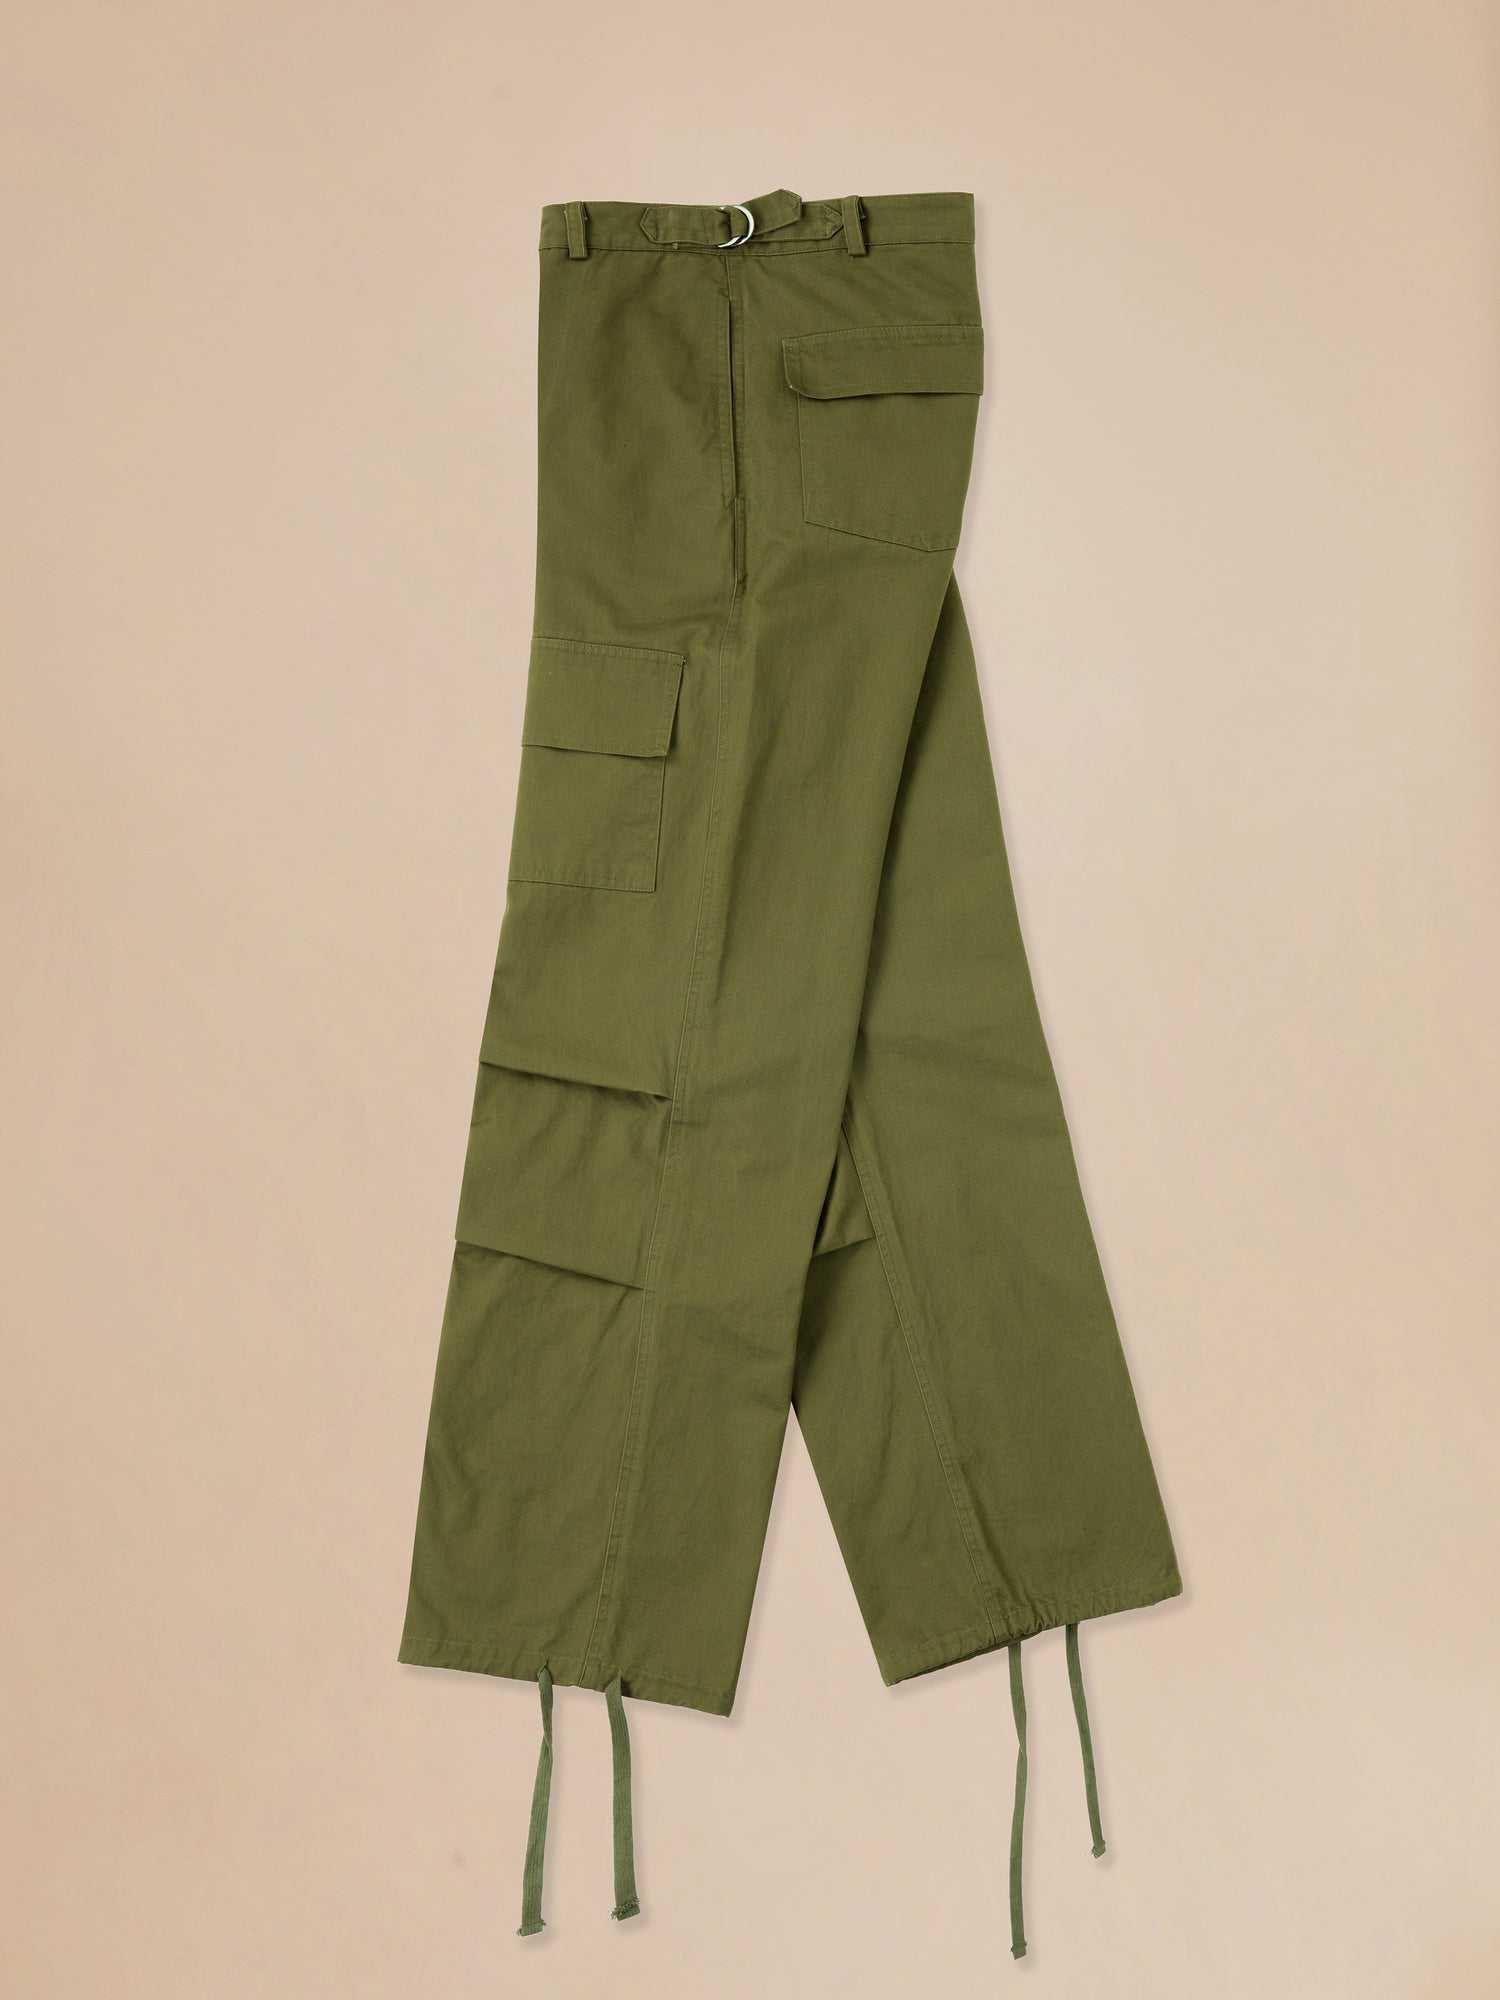 A pair of Found Parachute Cargo Twill Pants on a beige background.